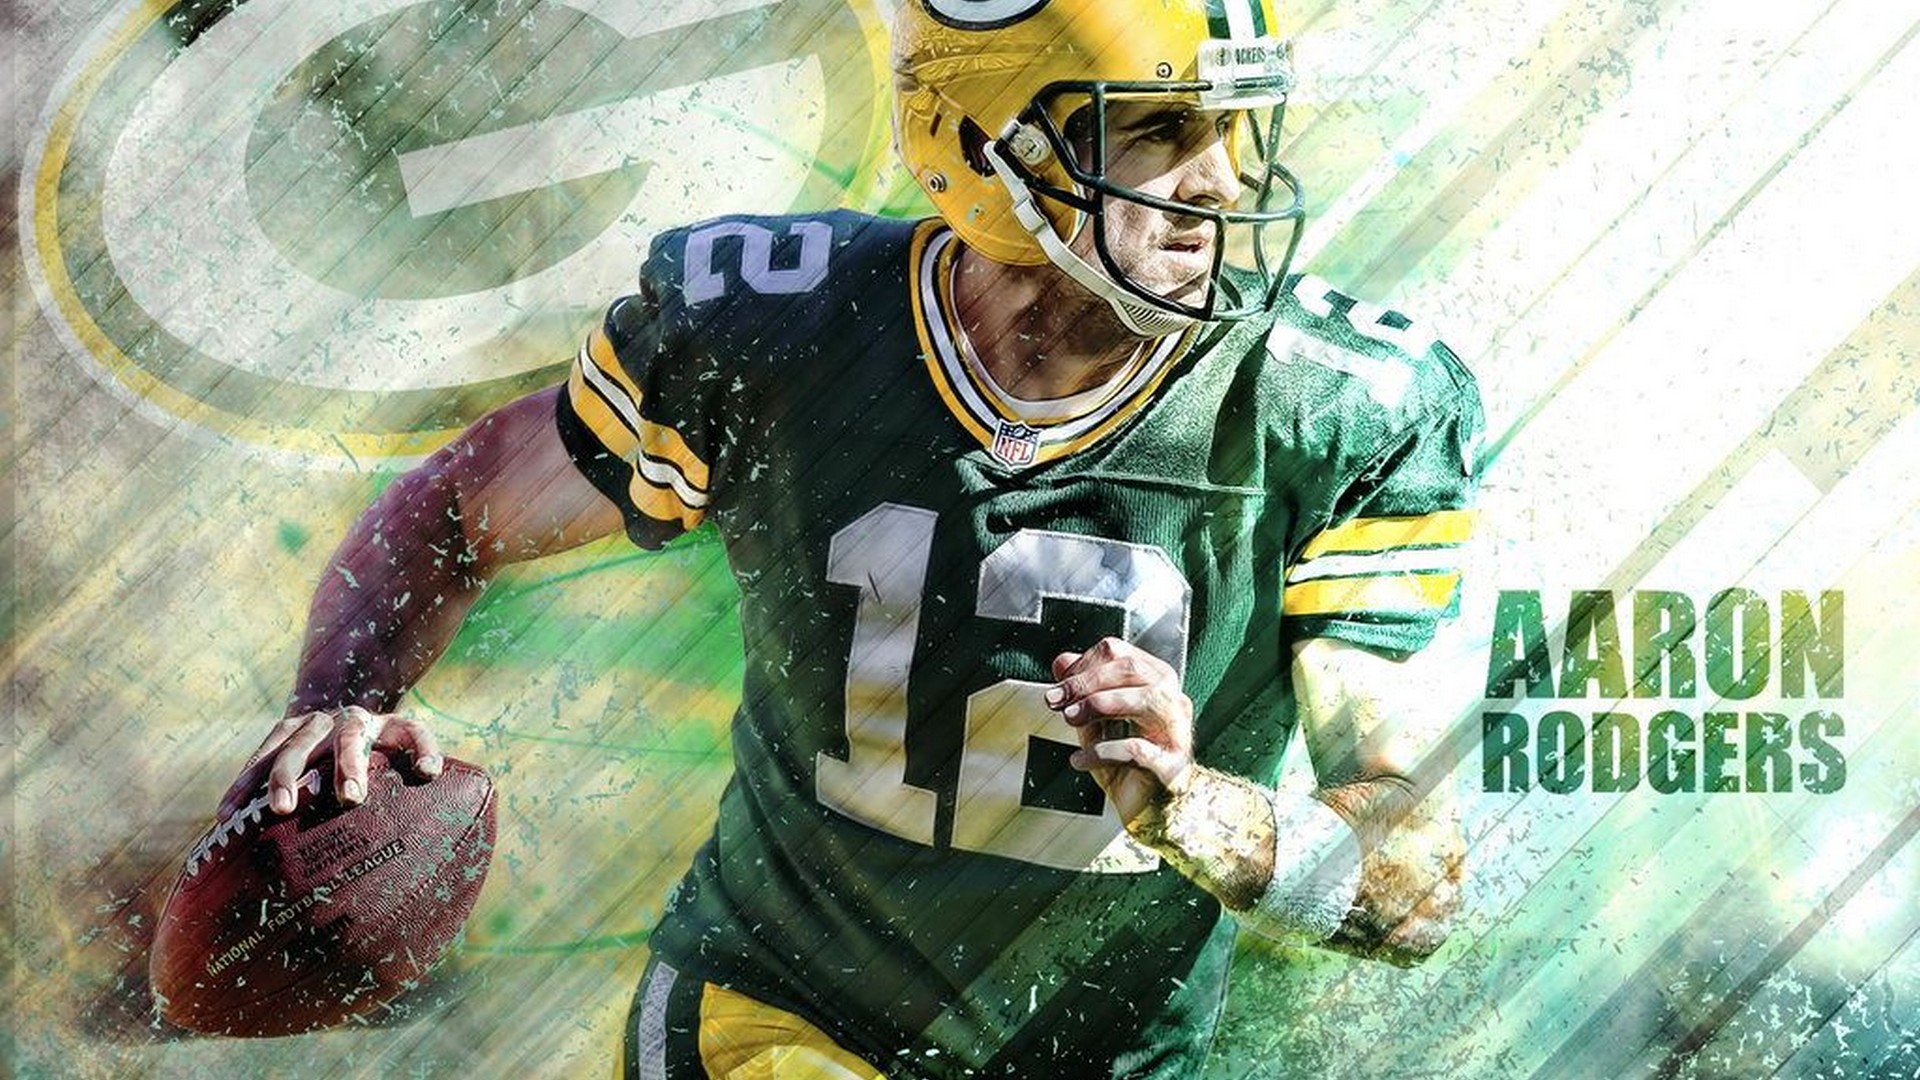 Aaron Rodgers Desktop Wallpaper With high-resolution 1920X1080 pixel. You can use this wallpaper for your Mac or Windows Desktop Background, iPhone, Android or Tablet and another Smartphone device